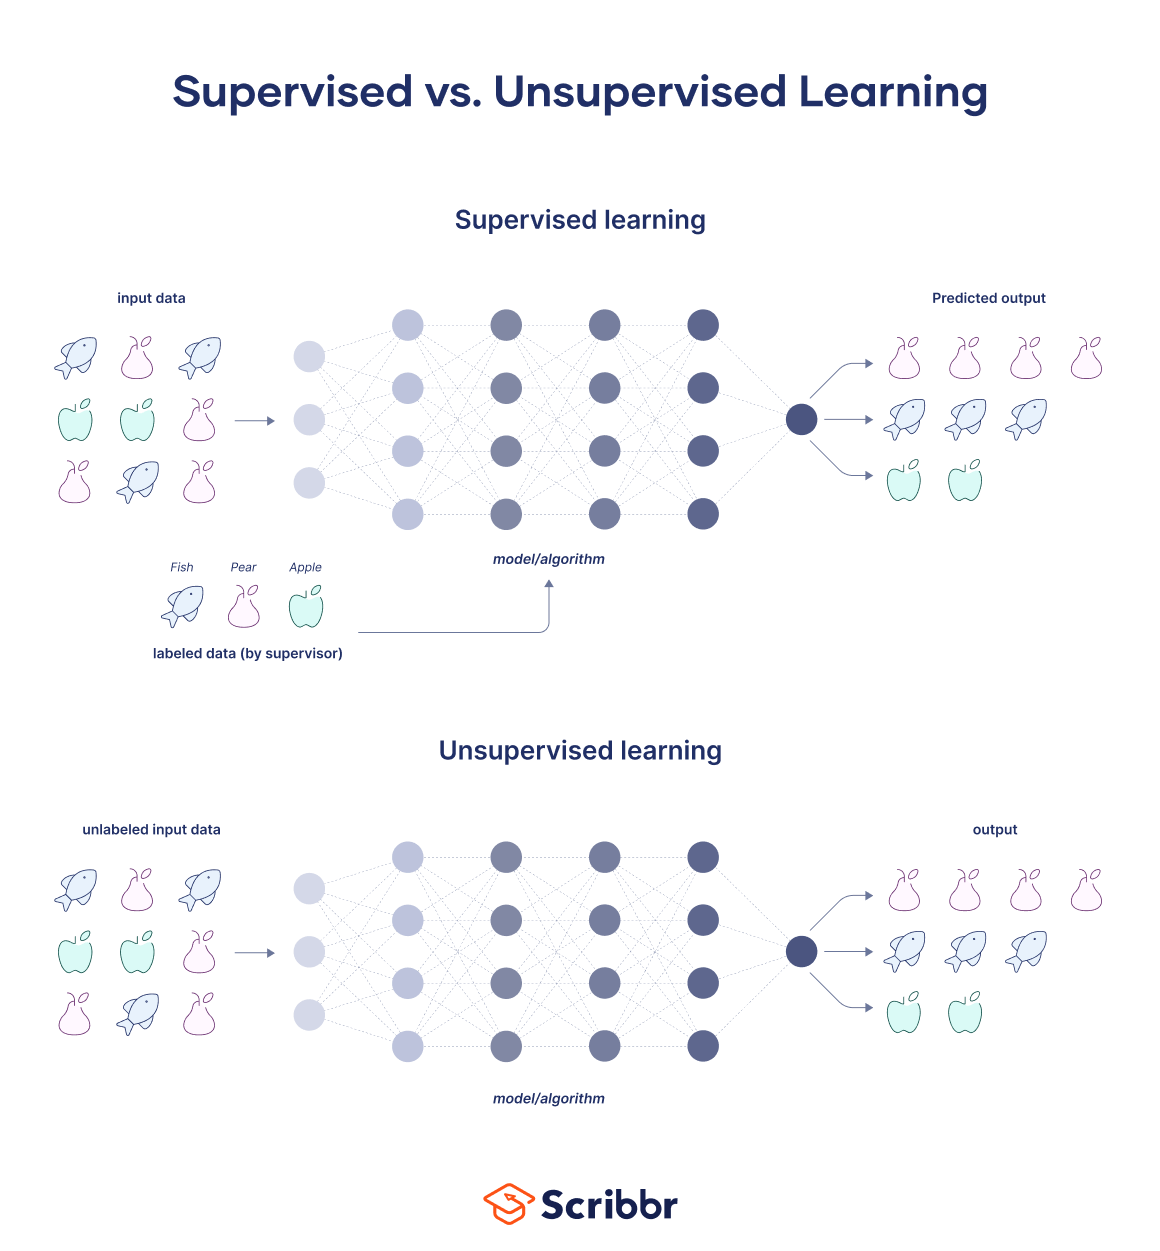 Supervised vs. Unsupervised Learning: Key Differences